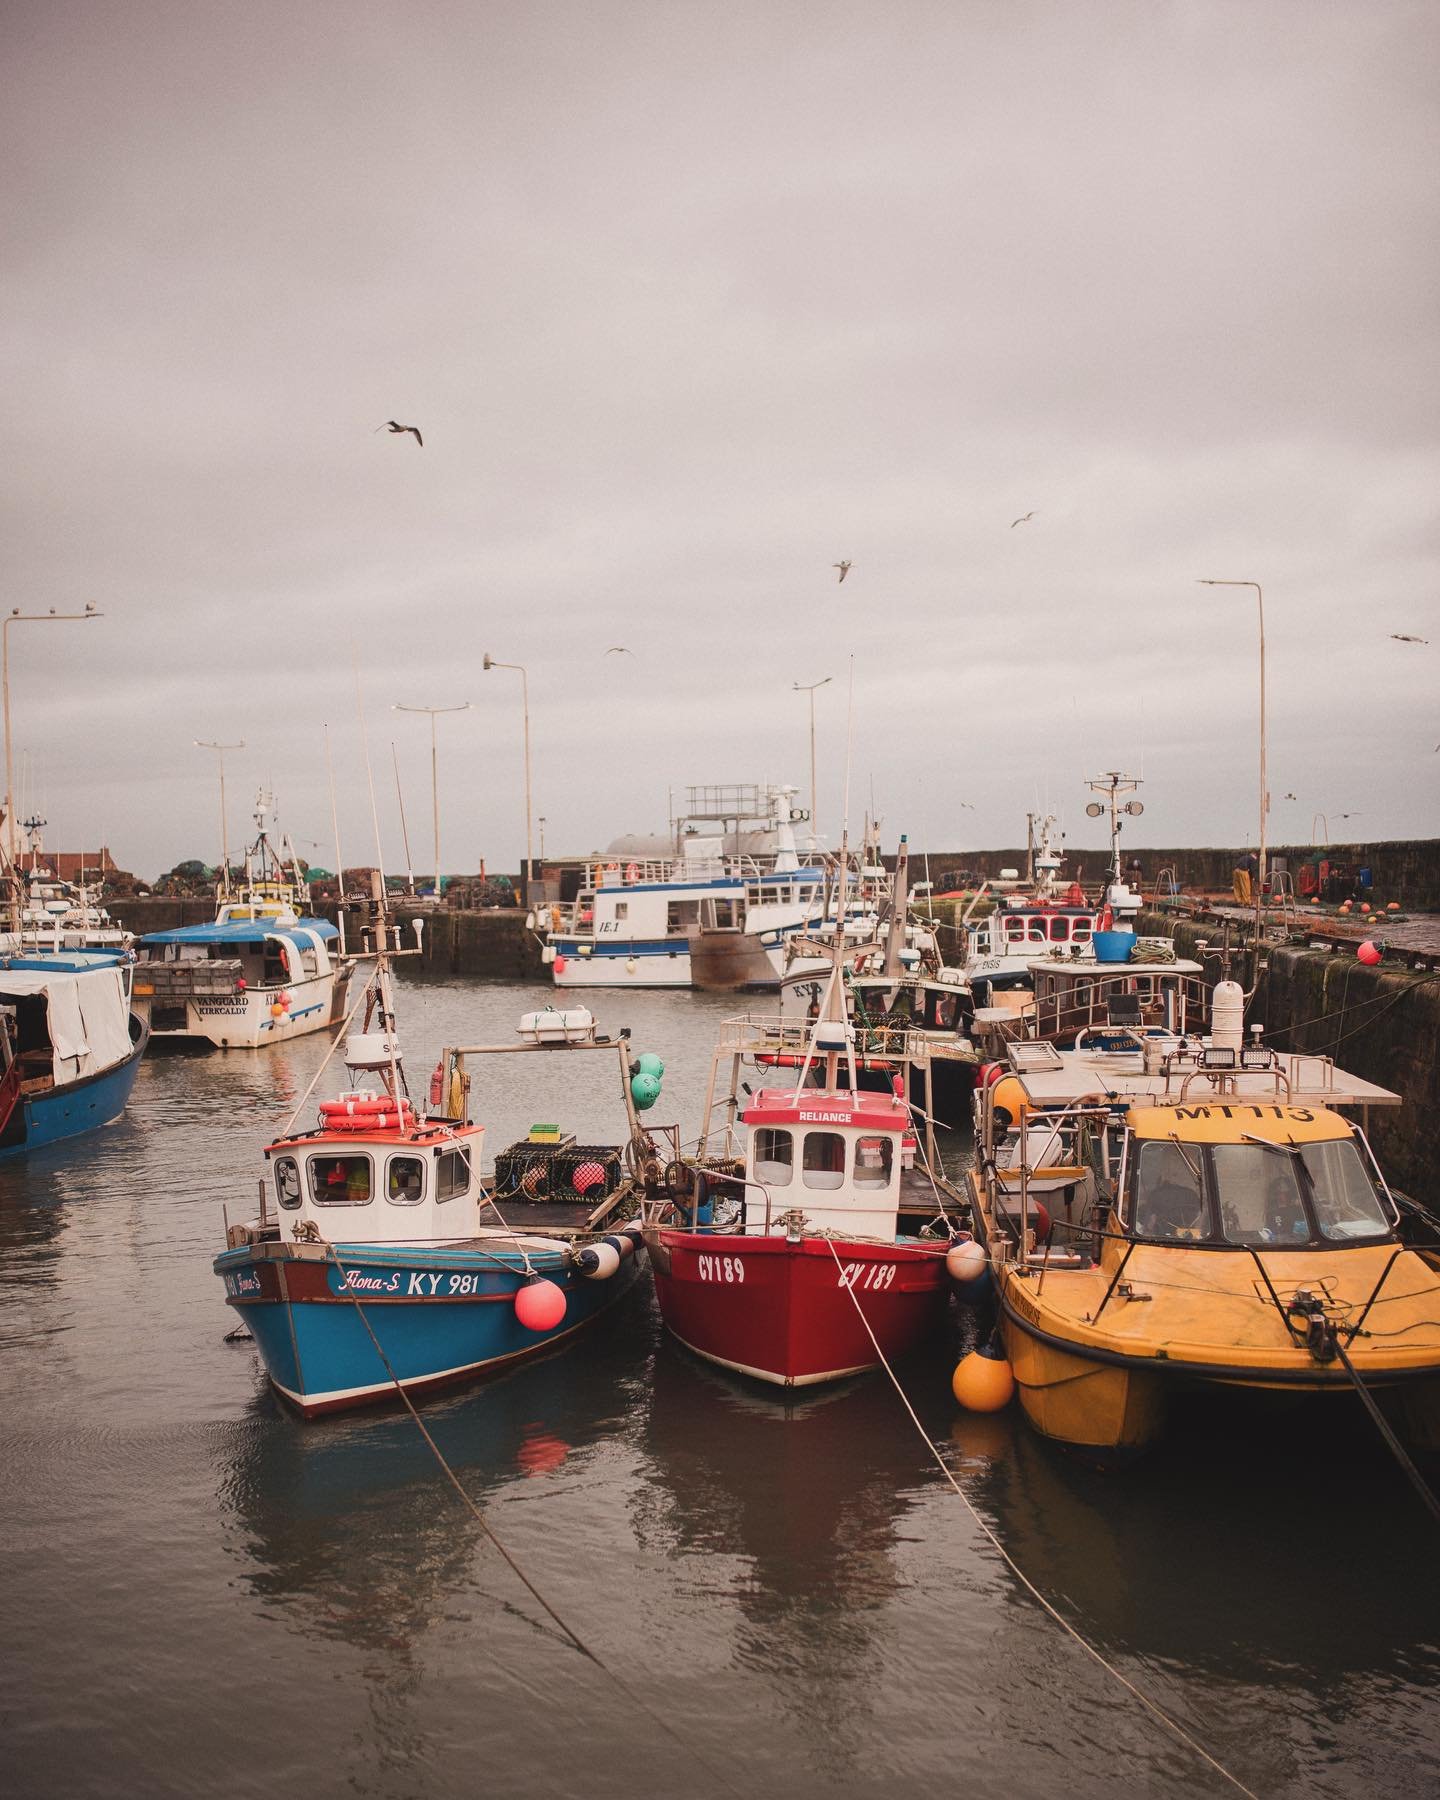 Fishing boats in the harbour. Fishing in the East Neuk of Fife, has a rich history dating back centuries. The area has been a hub for fishing due to its strategic coastal location and abundant marine life. Traditional methods like line fishing and ne